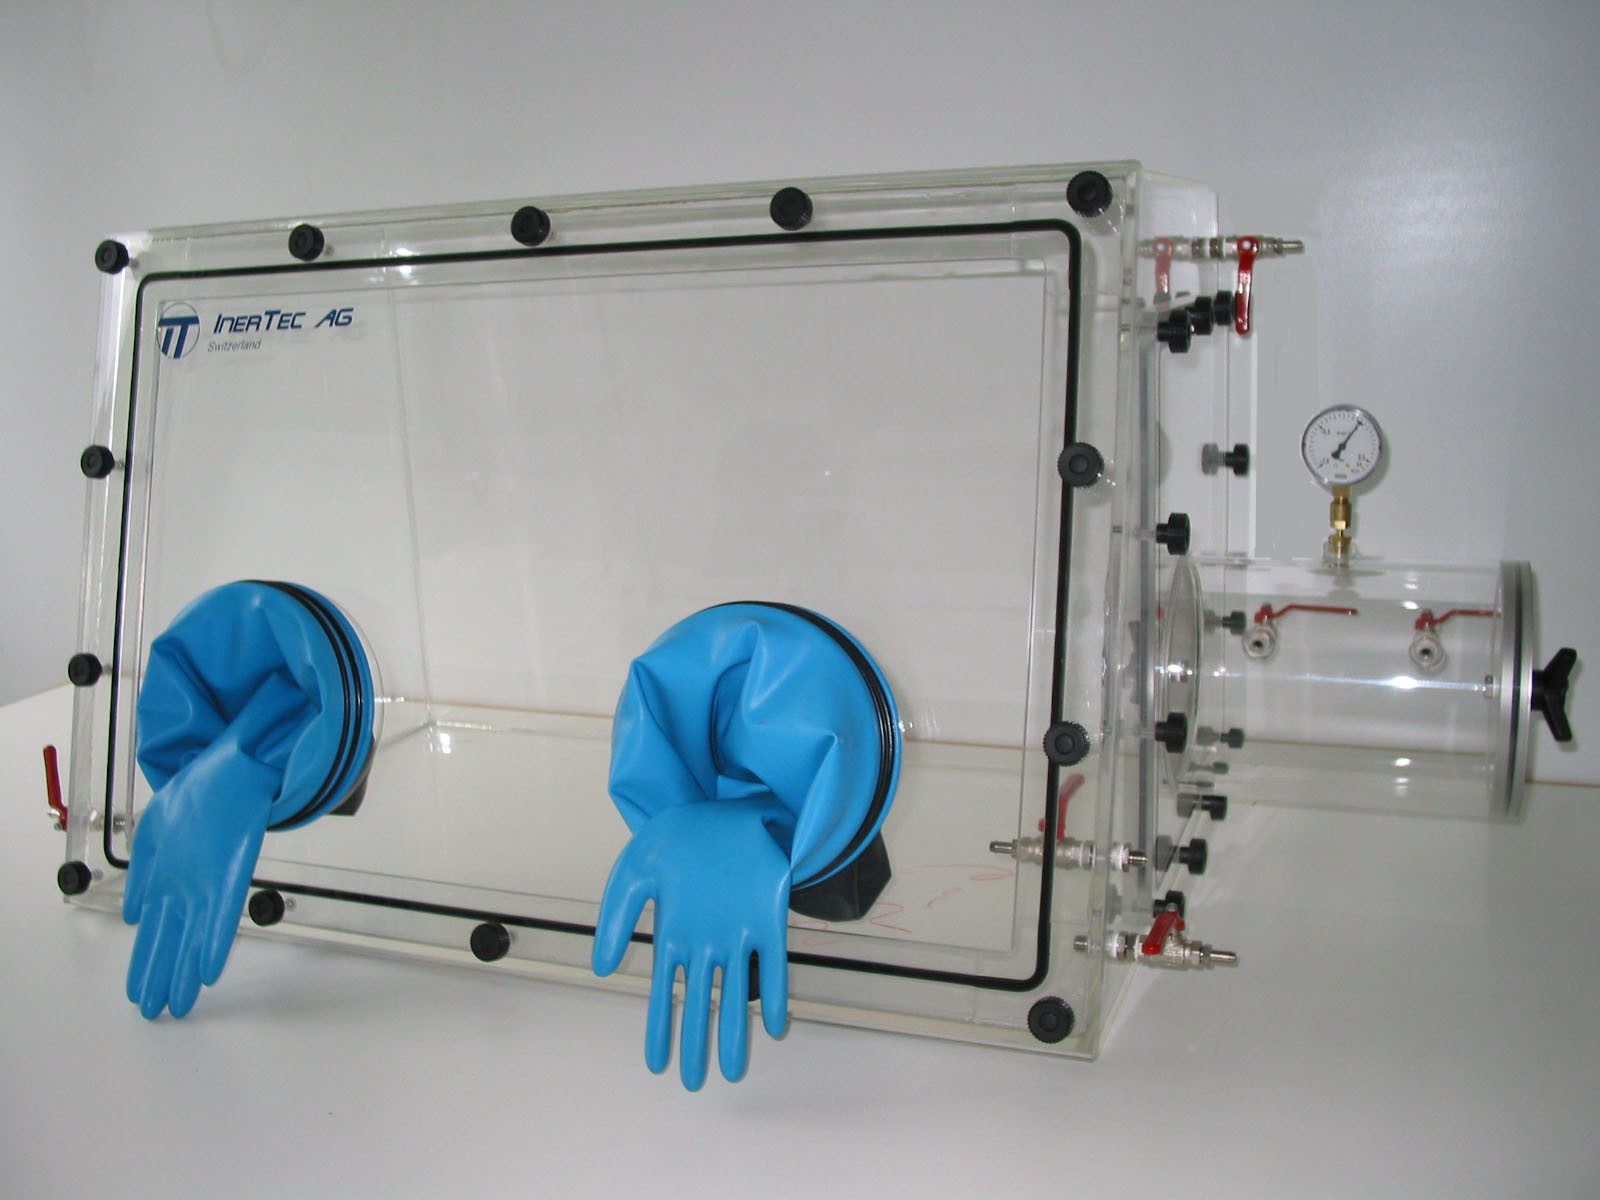 Glovebox made of acrylic&gt; Gas filling: by hand, front design: removable, side design: flange, removable, control: humidity display